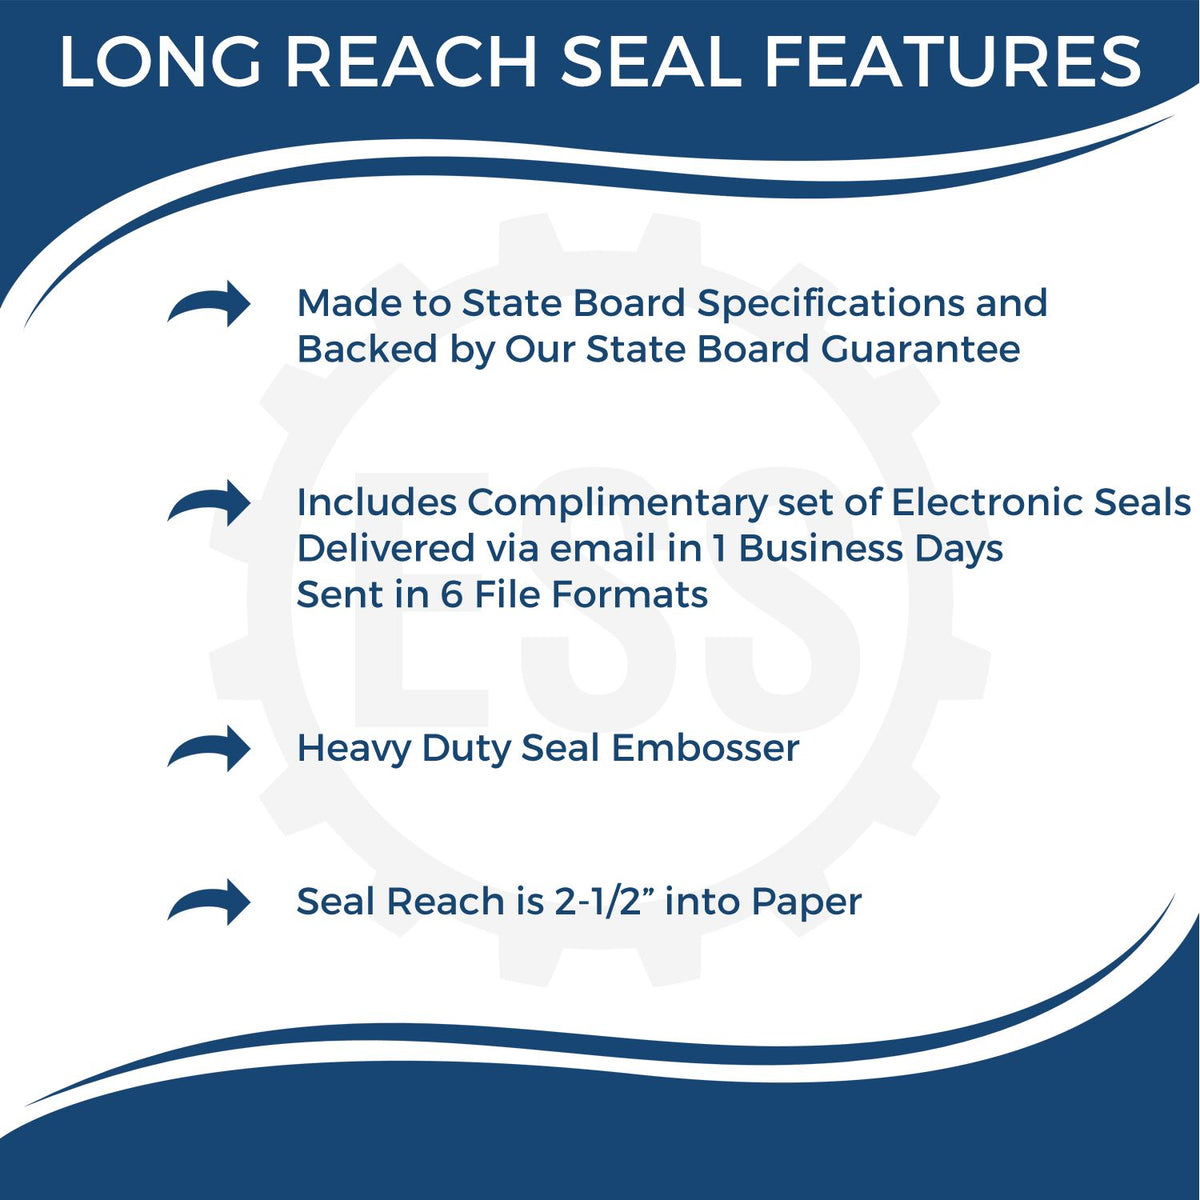 A picture of an infographic highlighting the selling points for the Long Reach Nevada Geology Seal